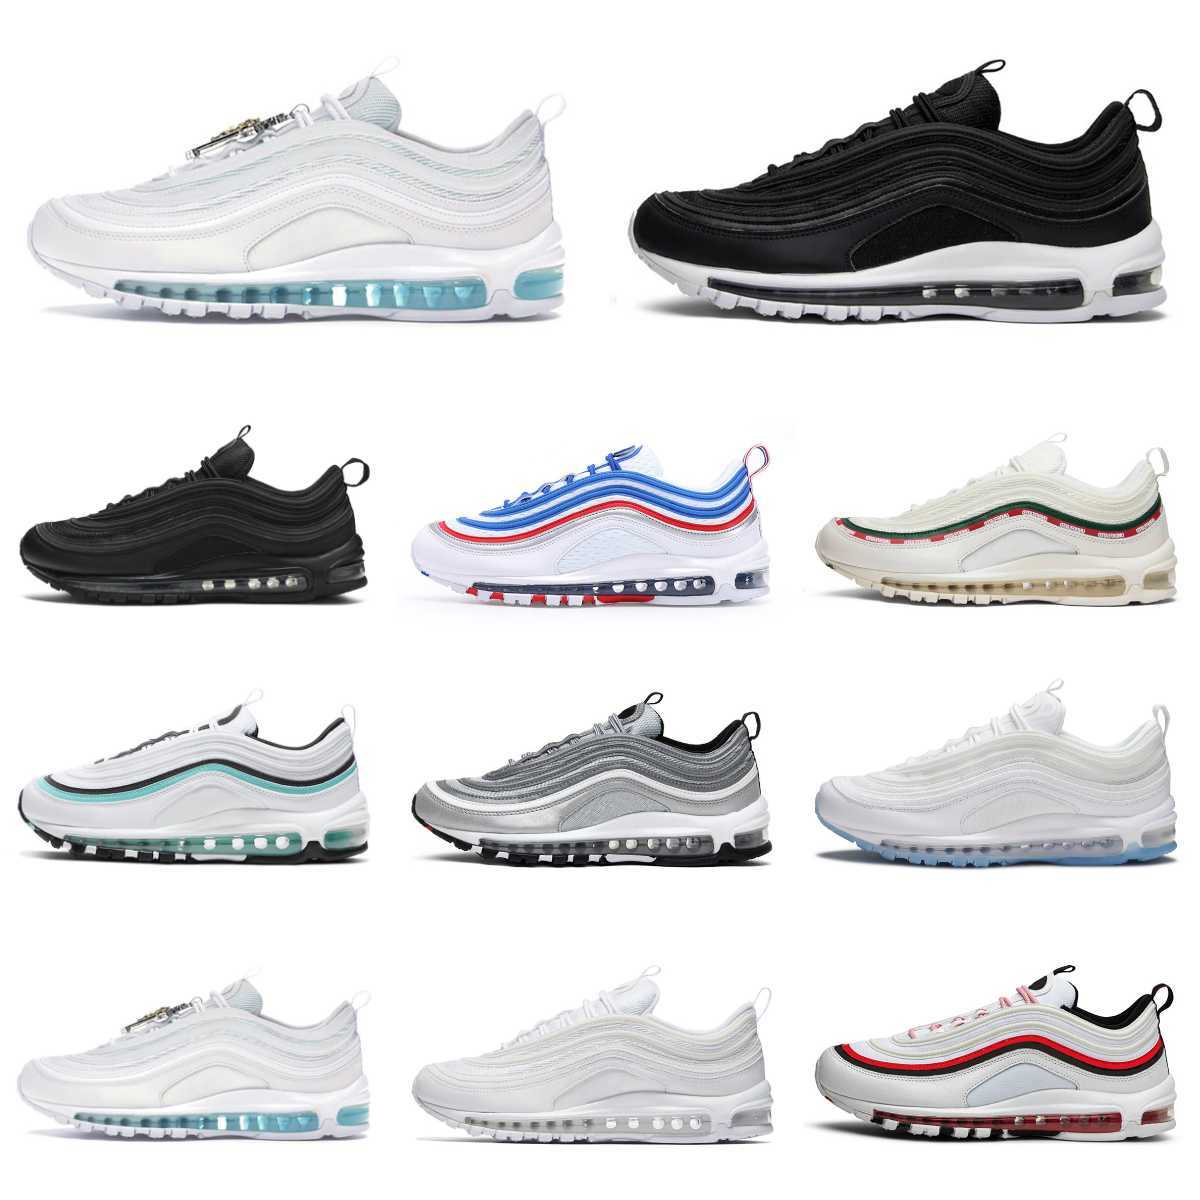 

Trainers Max 97 Sports Shoes Mens Women MSCHF X INRI Jesus Undefeated Black Summit Triple AirMaxS White Metalic Gold Designer Air 97s Sean Sliver Bullet Sneakers, Please contact us